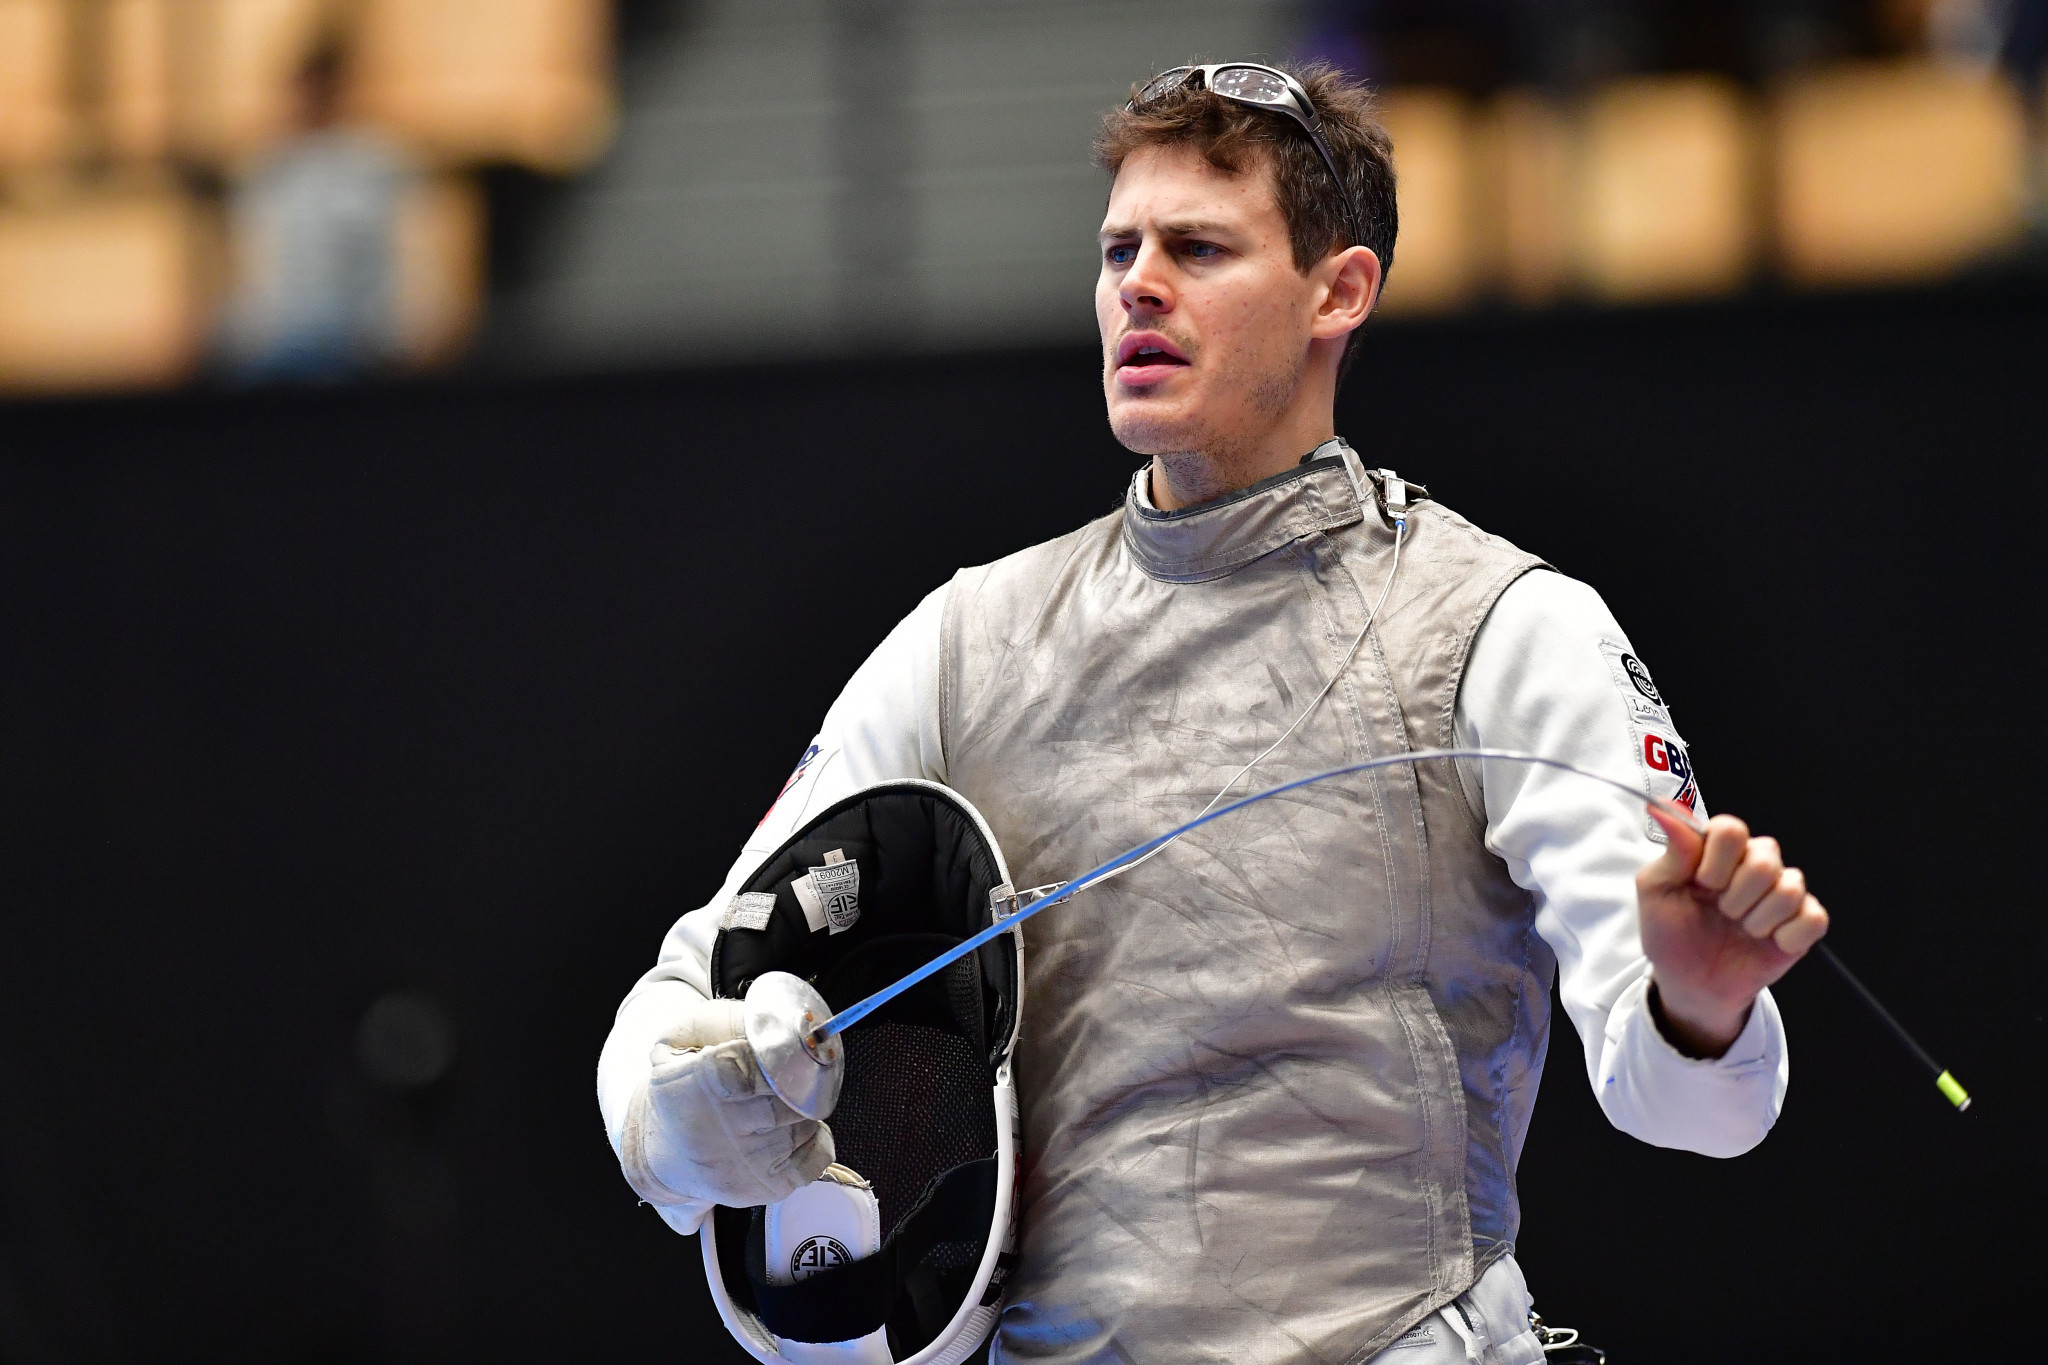 Home fencer earns showdown with Kruse at FIE Foil Grand Prix in Shanghai